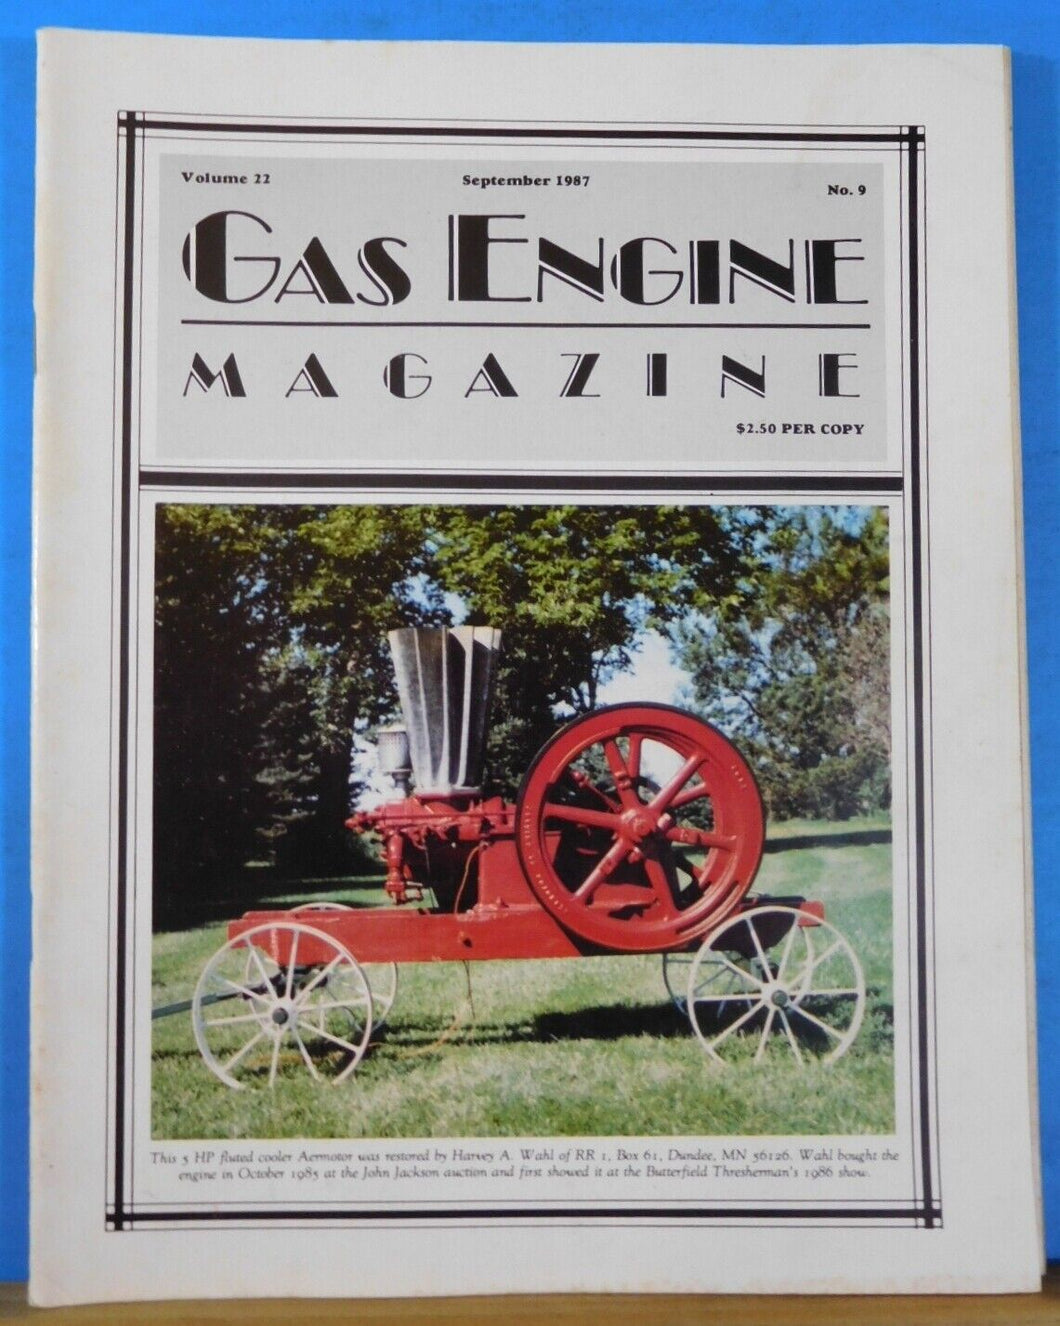 Gas Engine Magazine 1987 Sep Obtaining and Restoring a Ransome Crawler